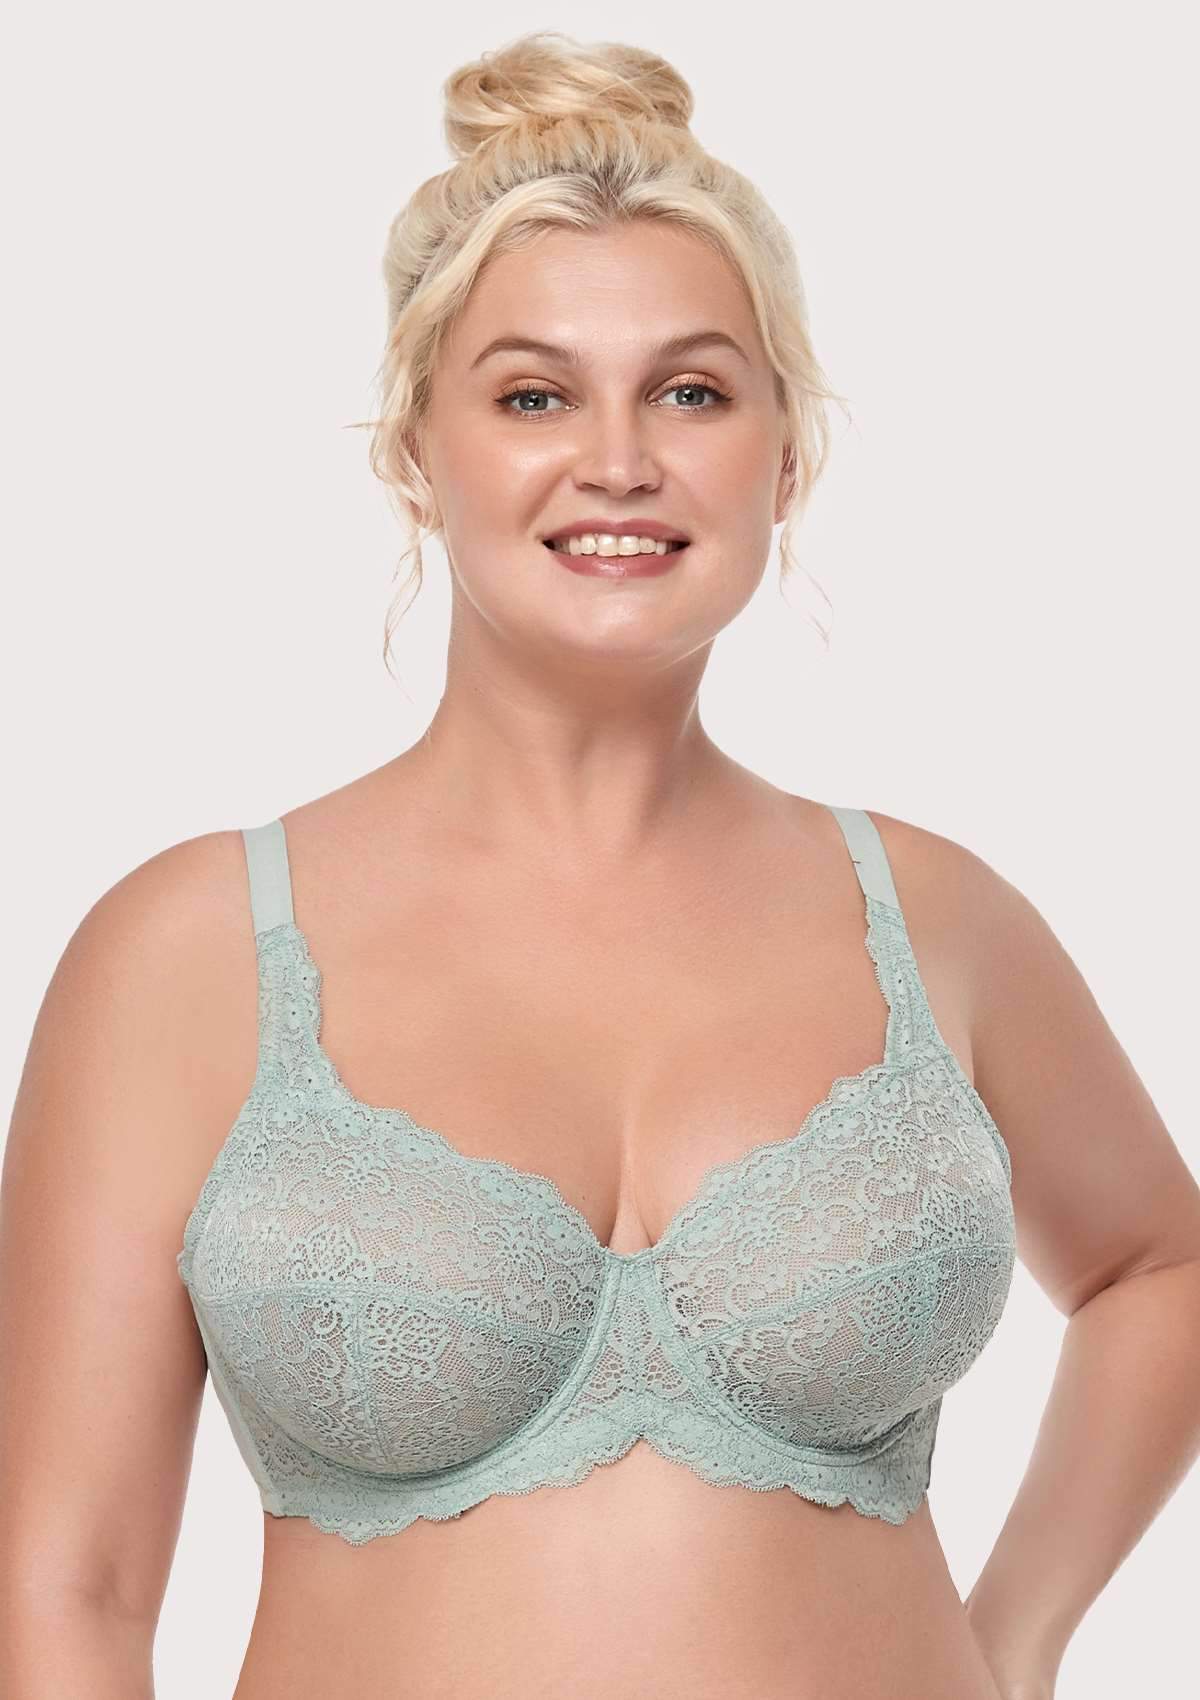 HSIA All-Over Floral Lace: Best Bra For Elderly With Sagging Breasts - Crystal Blue / 44 / DD/E